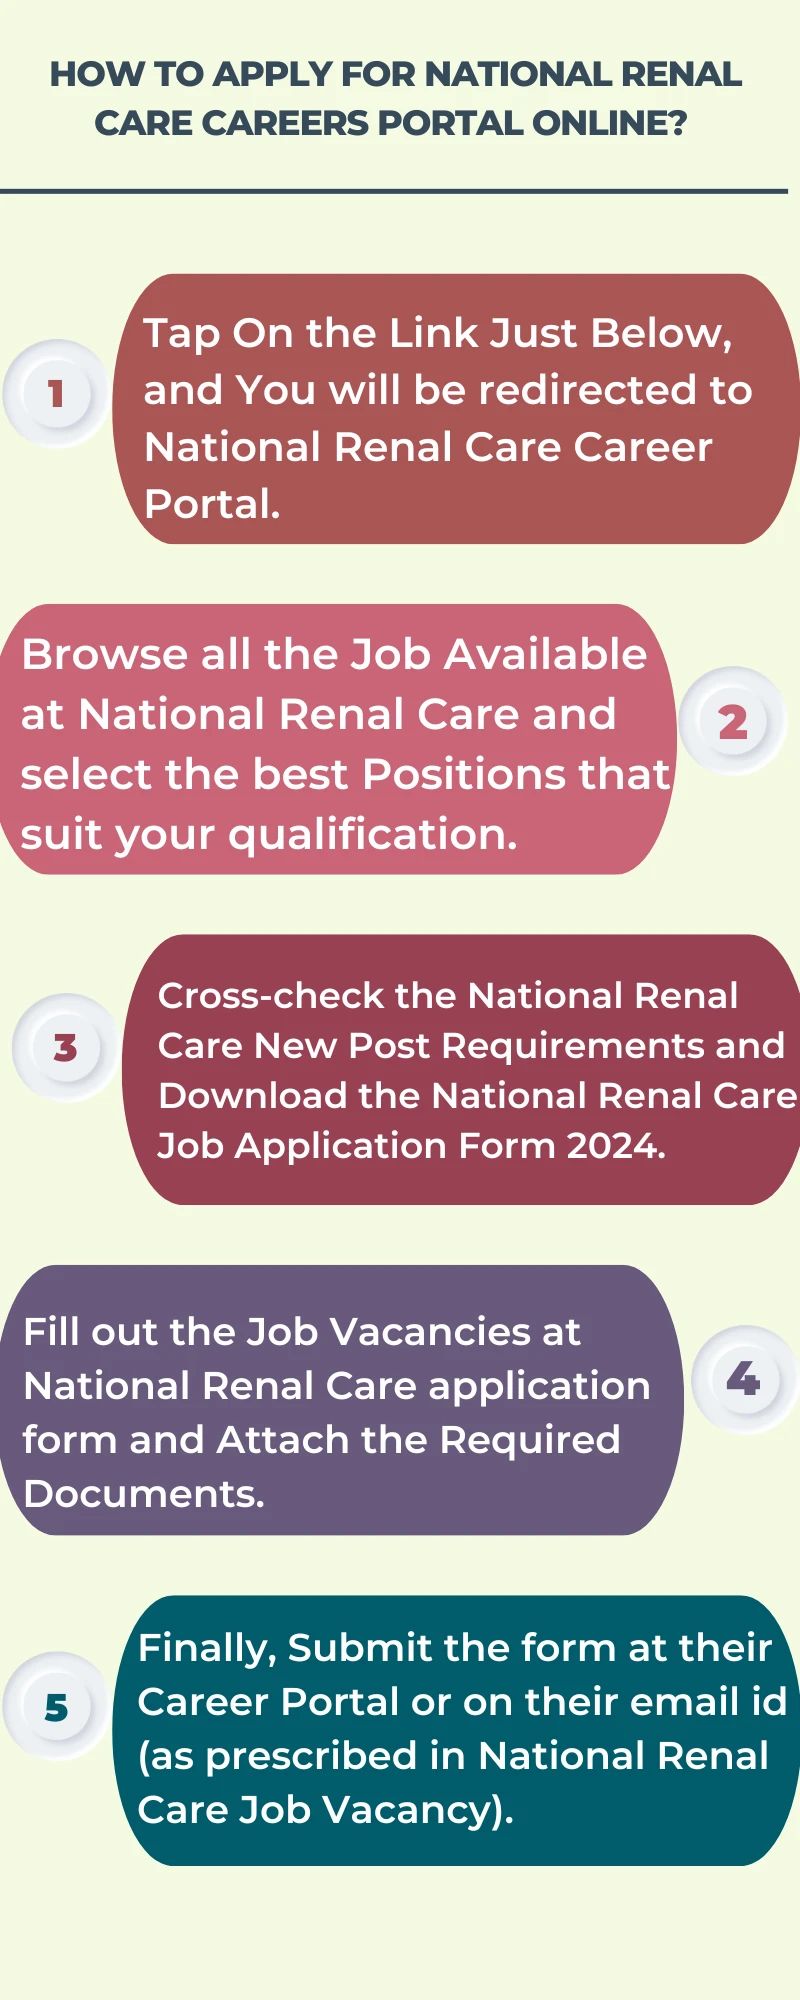 How To Apply for National Renal Care Careers Portal Online? 